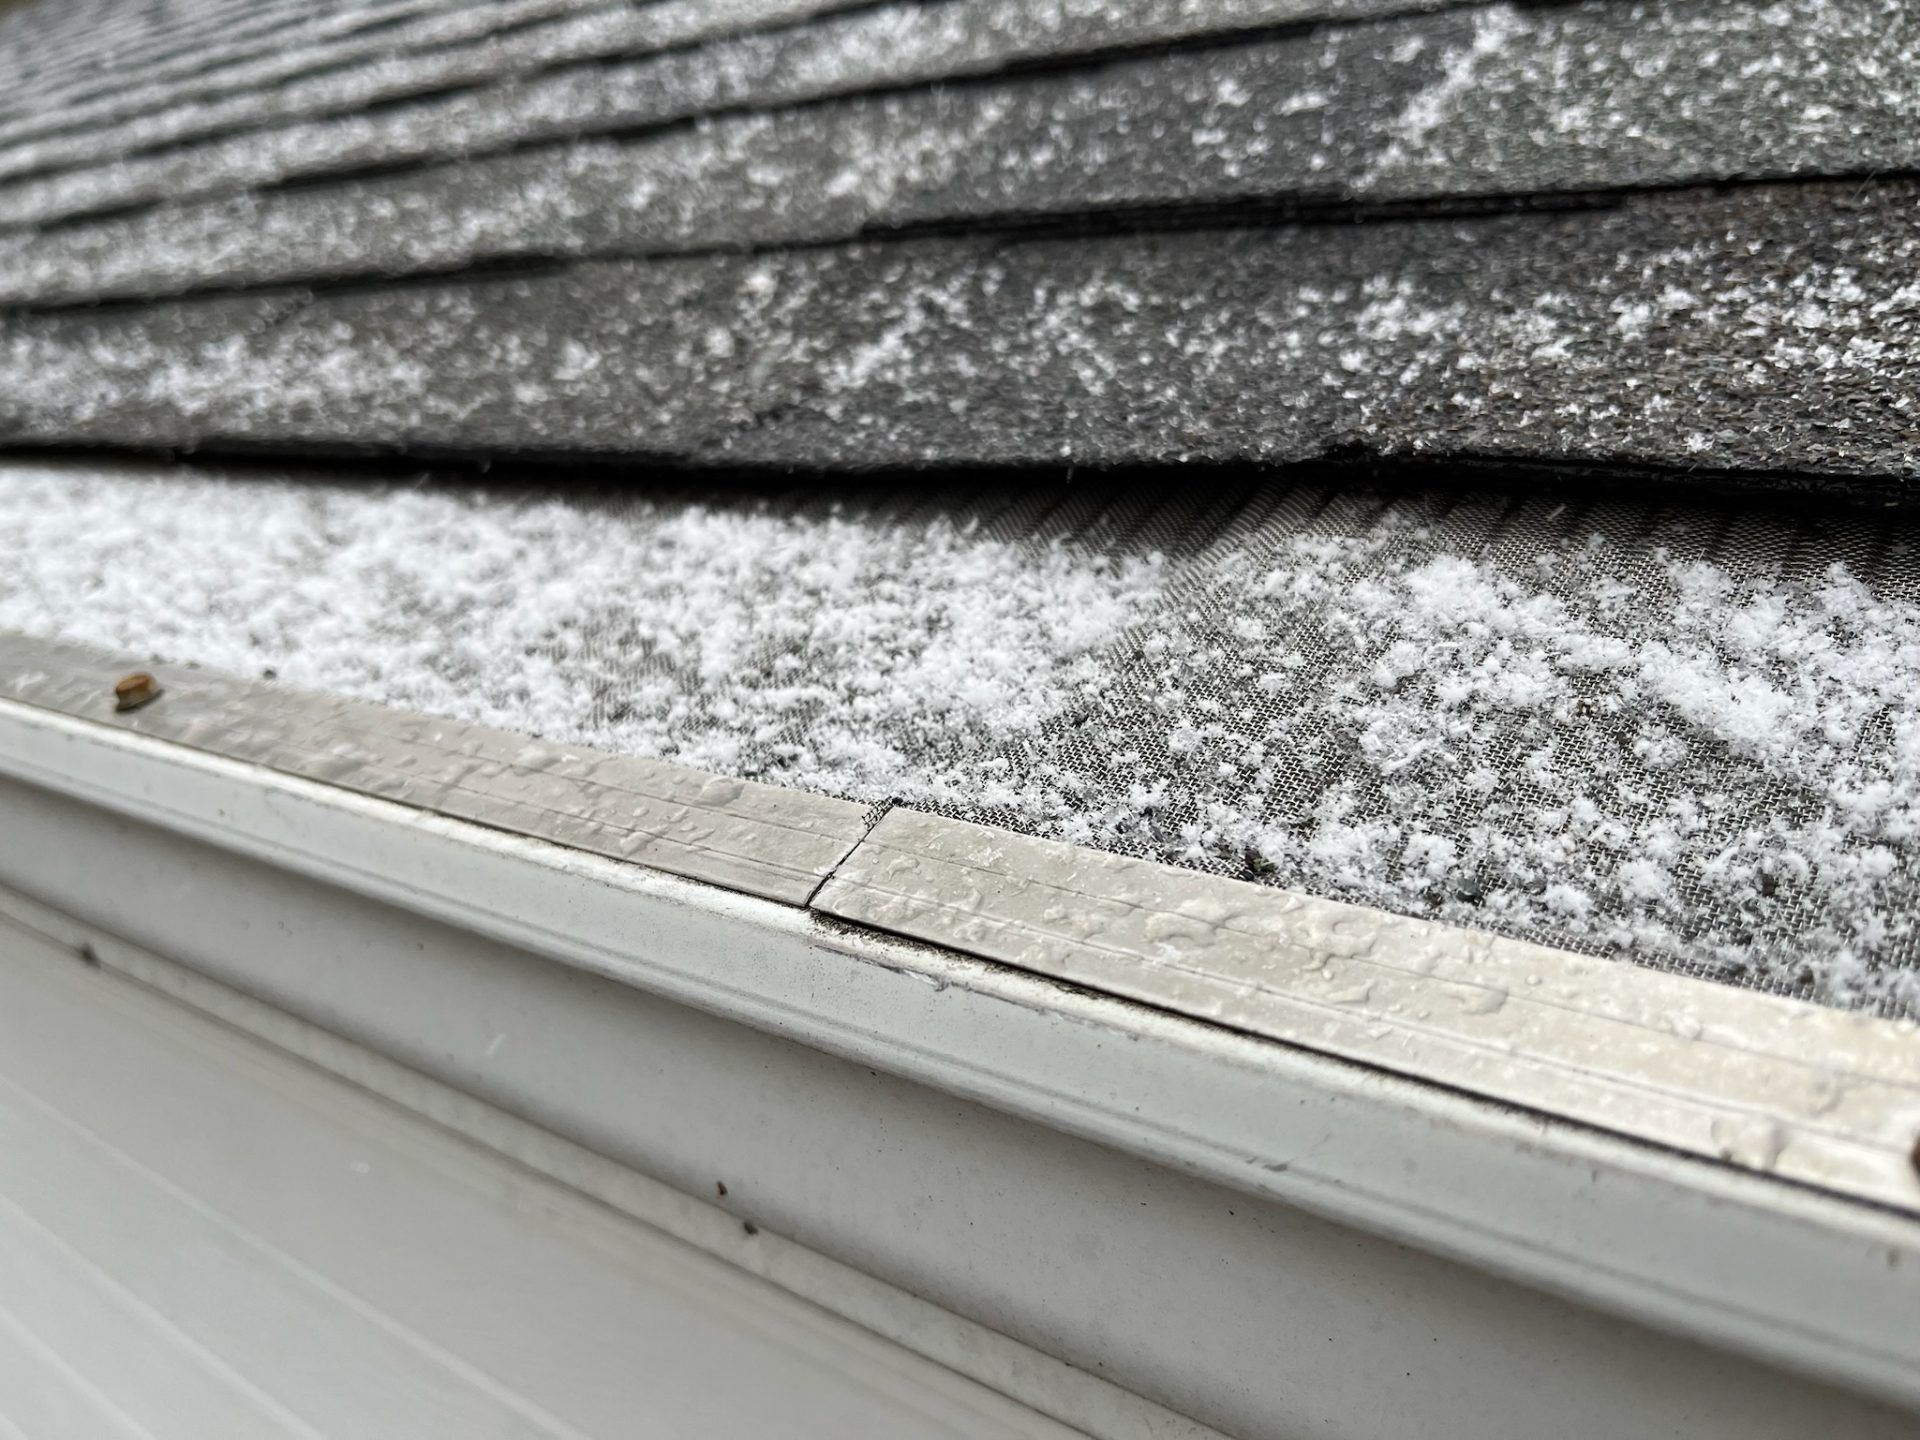 If your gutters have had previous issues clogs, January is the perfect time of year to get guards.